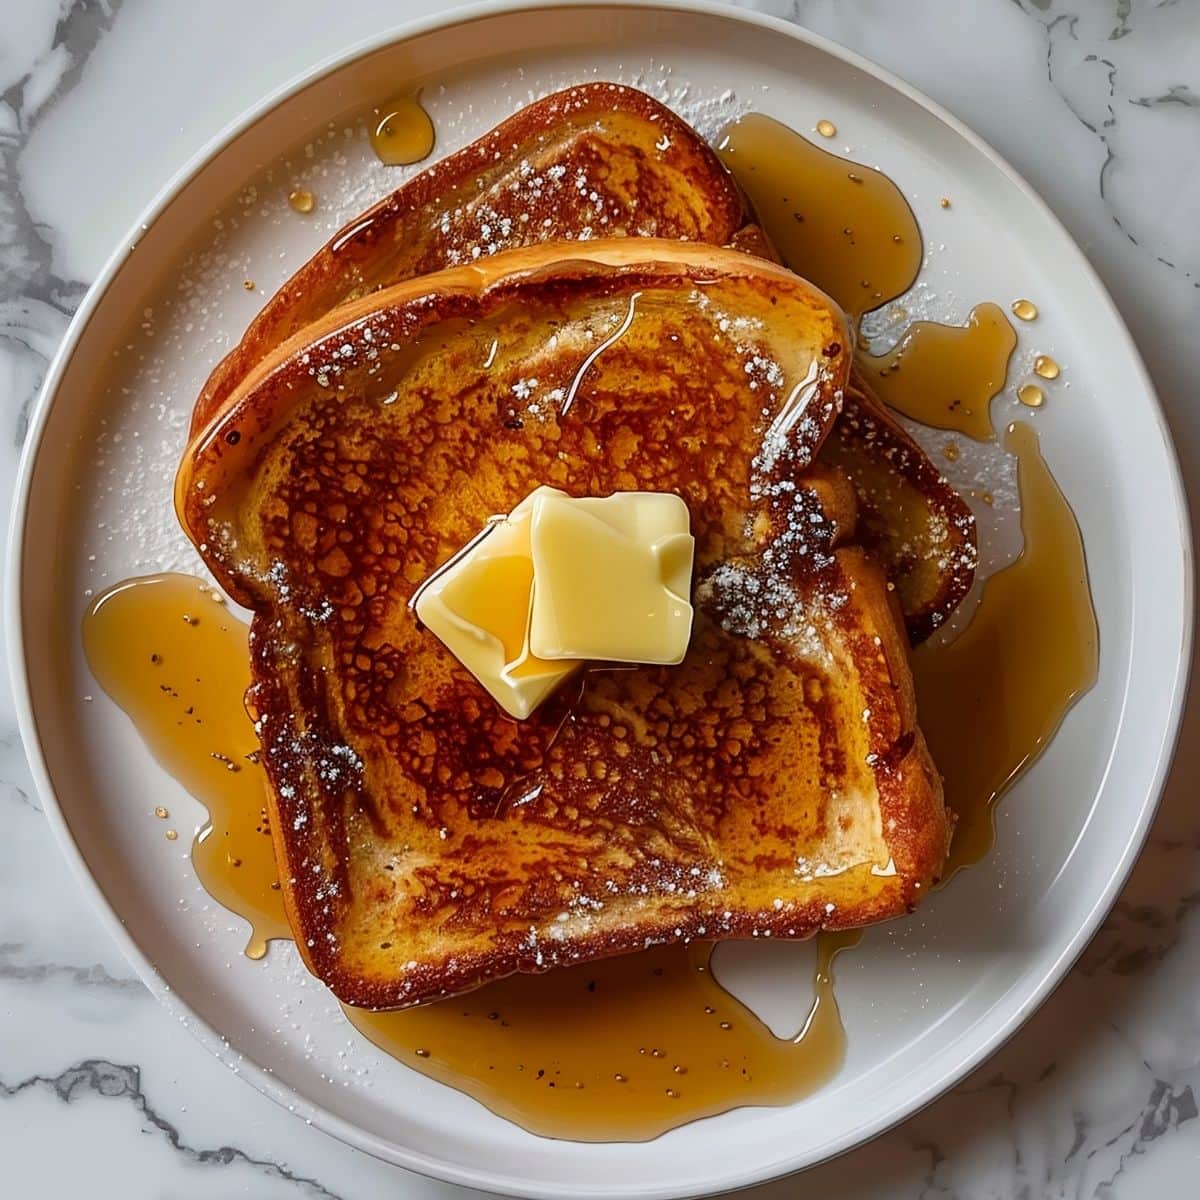 Two Caramelized Slices of McCormick French Toast with Butter, Powdered Sugar, and Maple Syrup on a White Plate on a White Marble Table